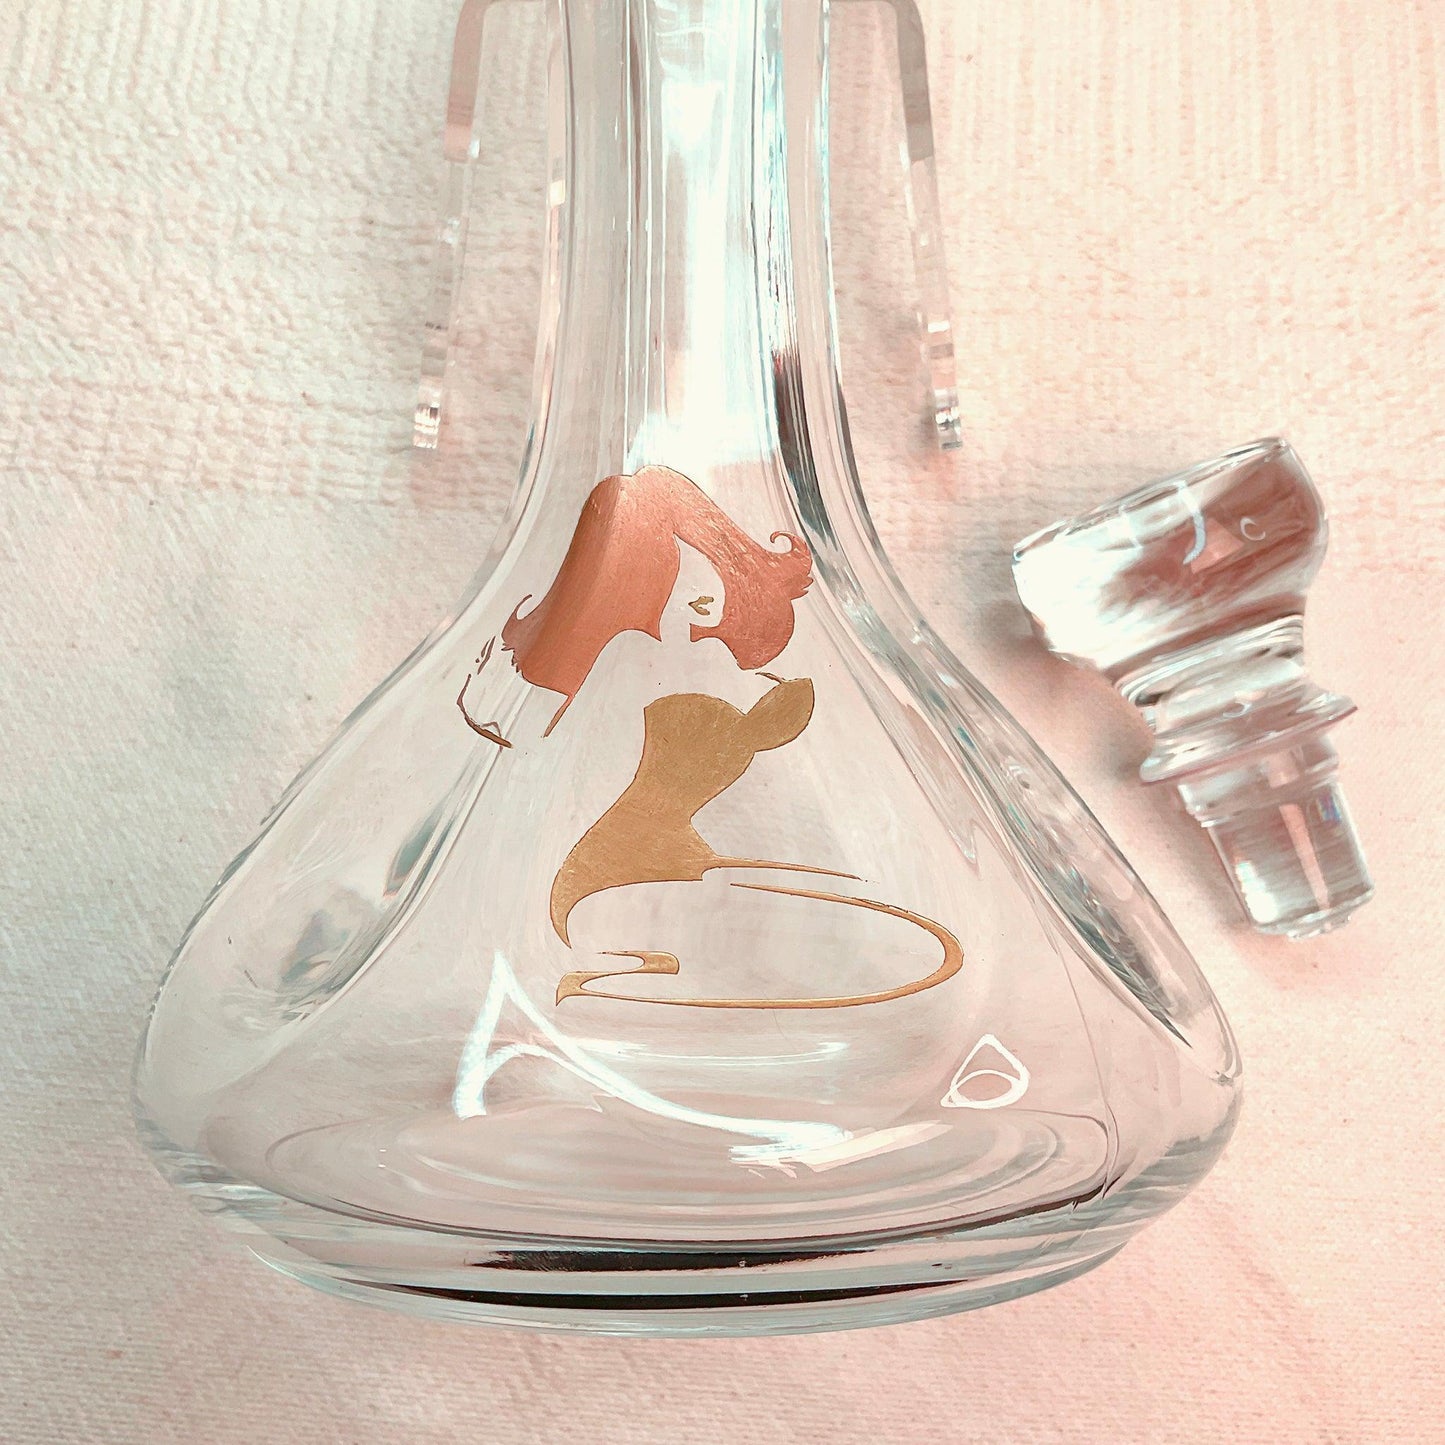 Pin-up Decanter - Offensively Domestic